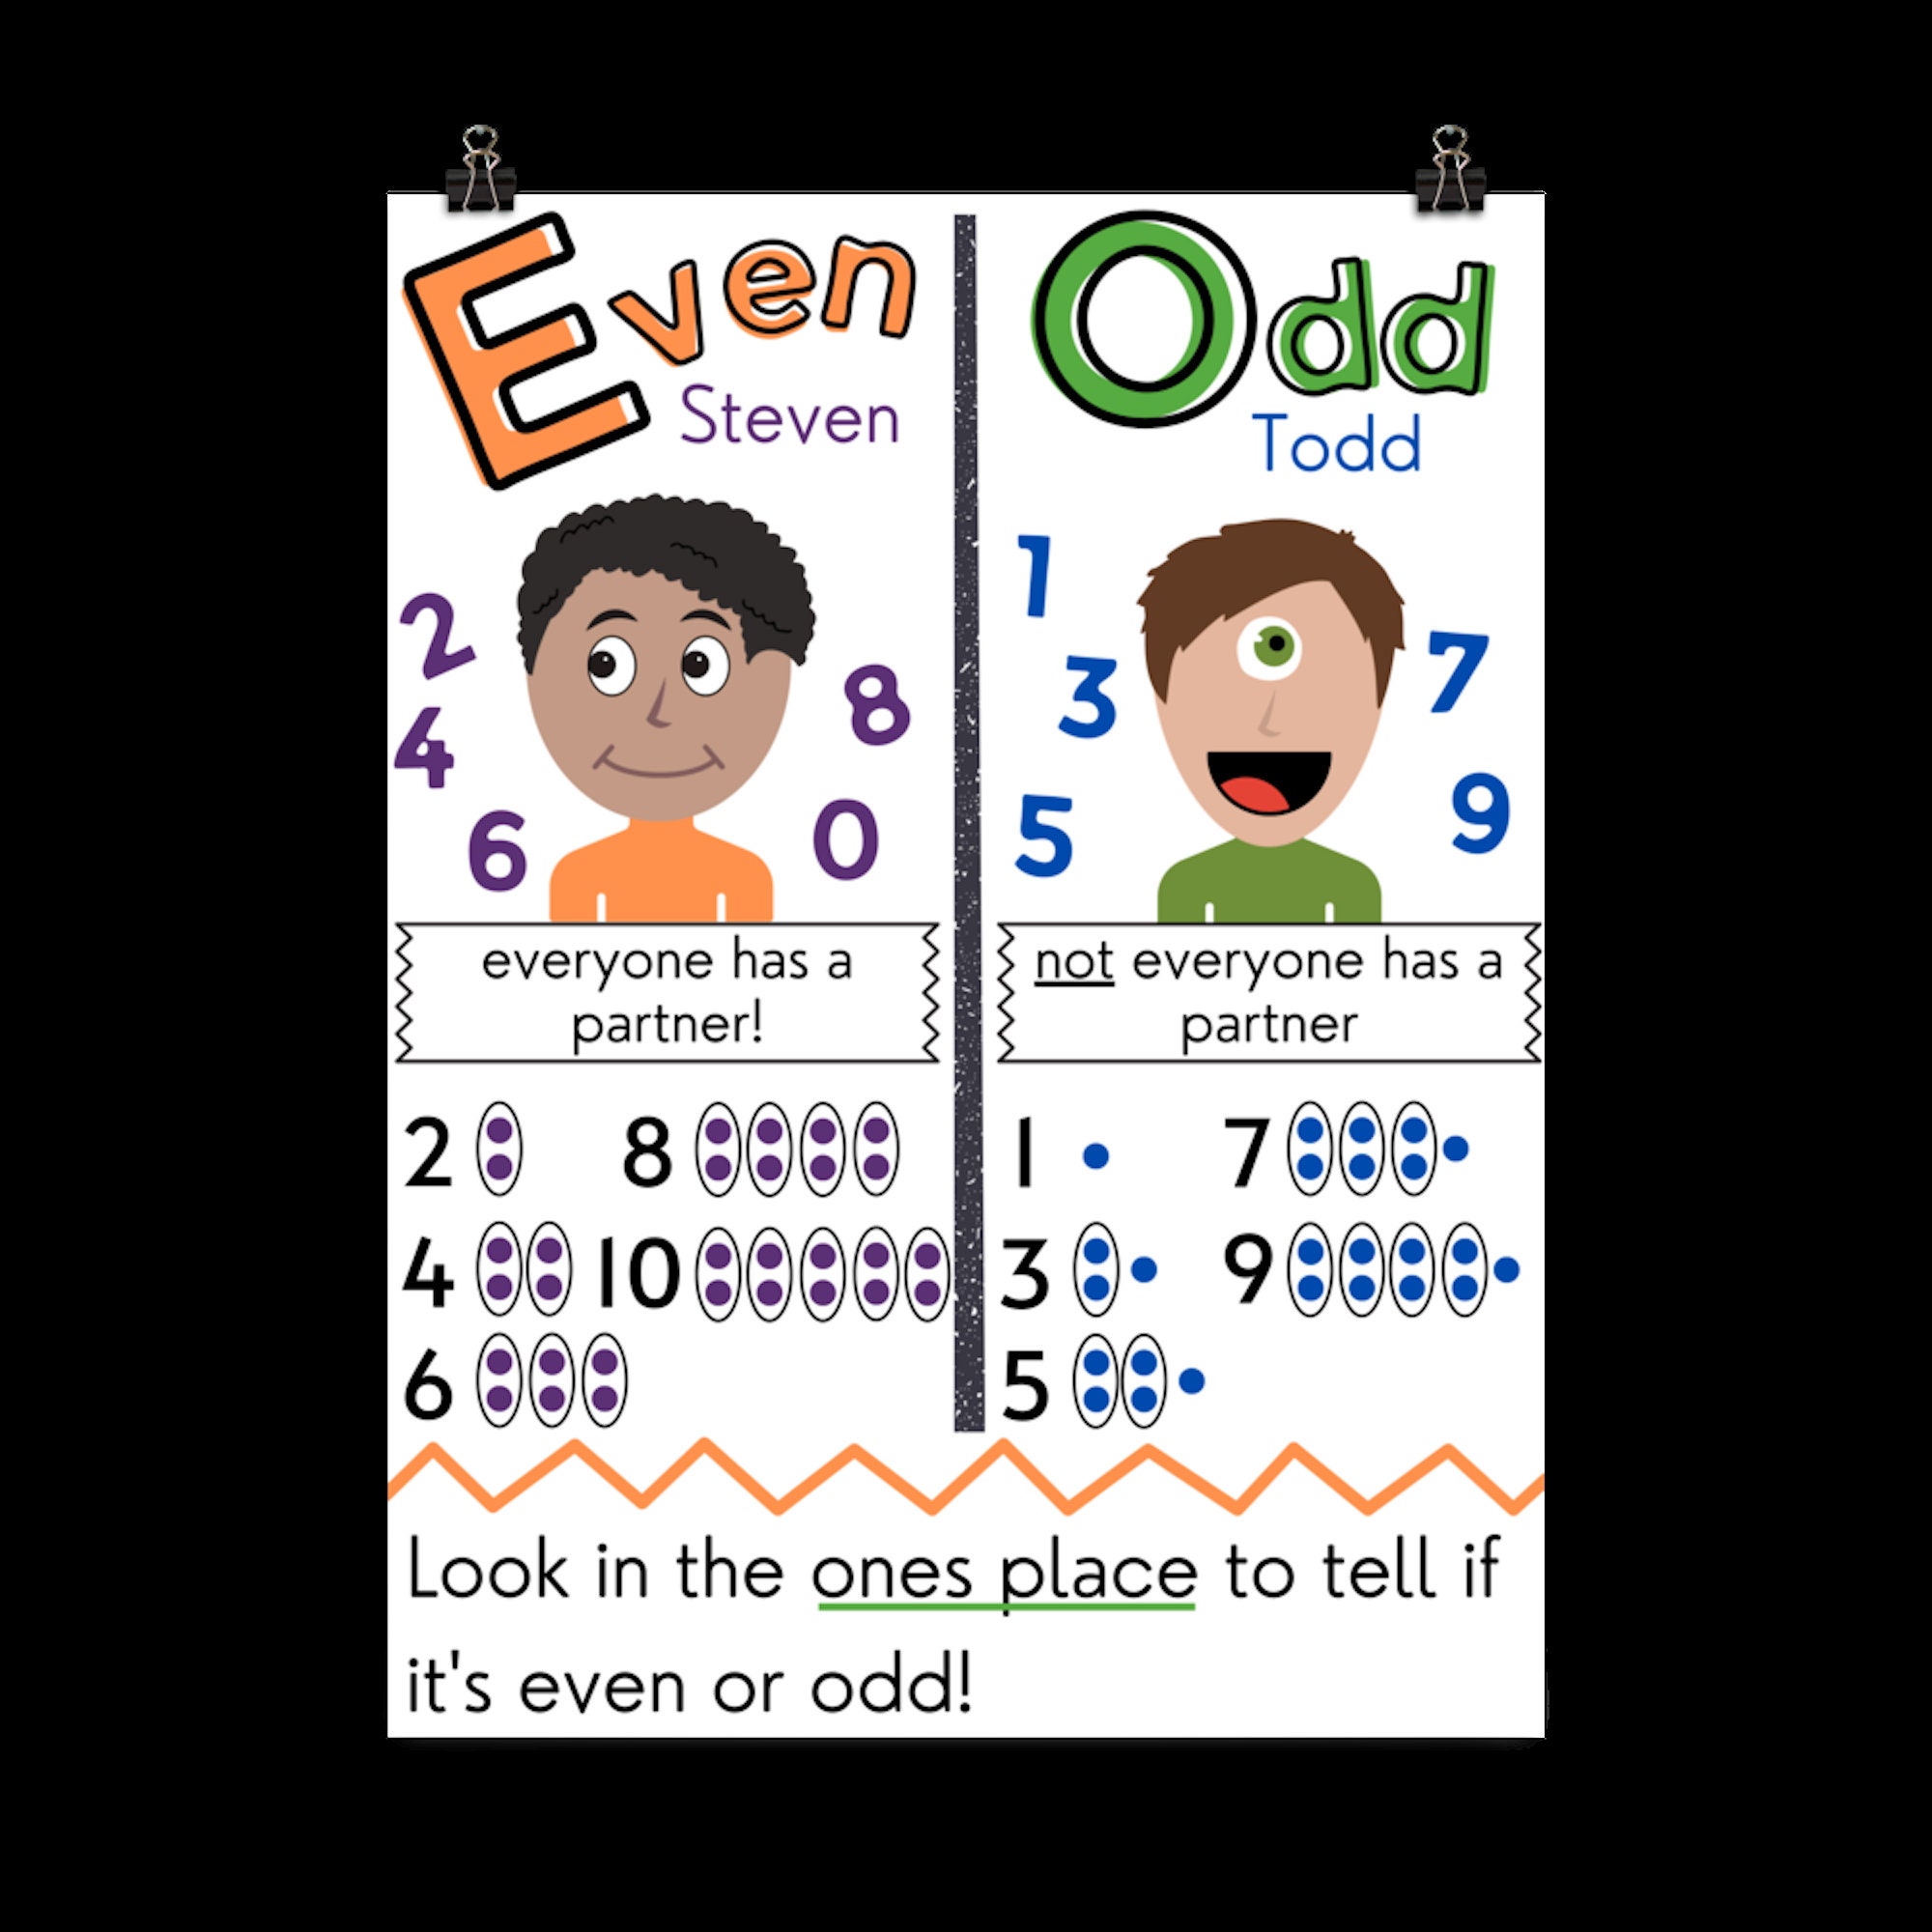 Second Grade - Even and Odd Numbers - Even Steven & Odd Todd Anchor Chart